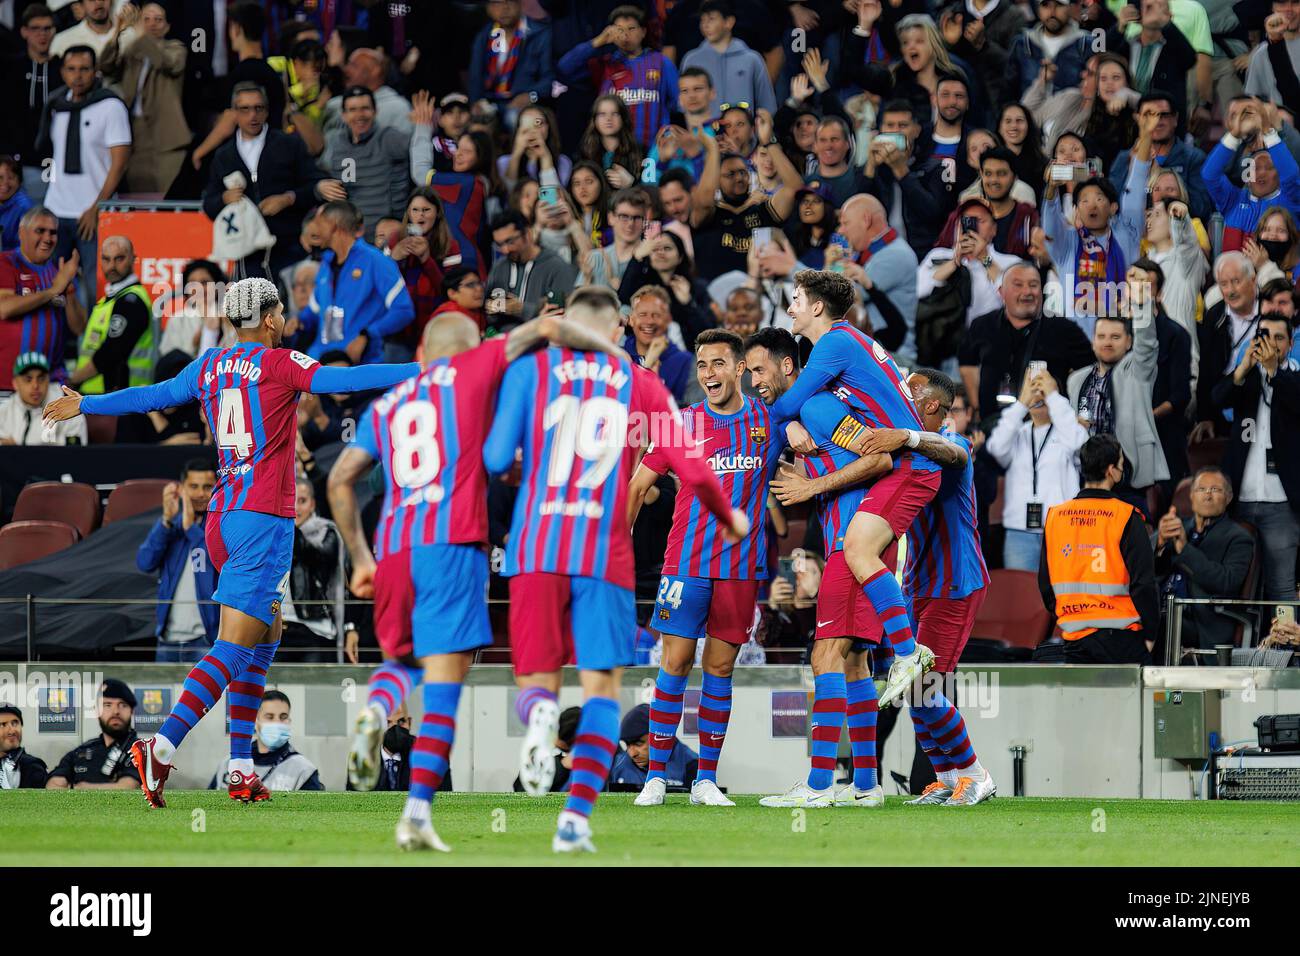 BARCELONA - MAY 1: Barcelona players celebrate after scoring a goal at the La Liga match between FC Barcelona and RCD Mallorca at the Camp Nou Stadium Stock Photo